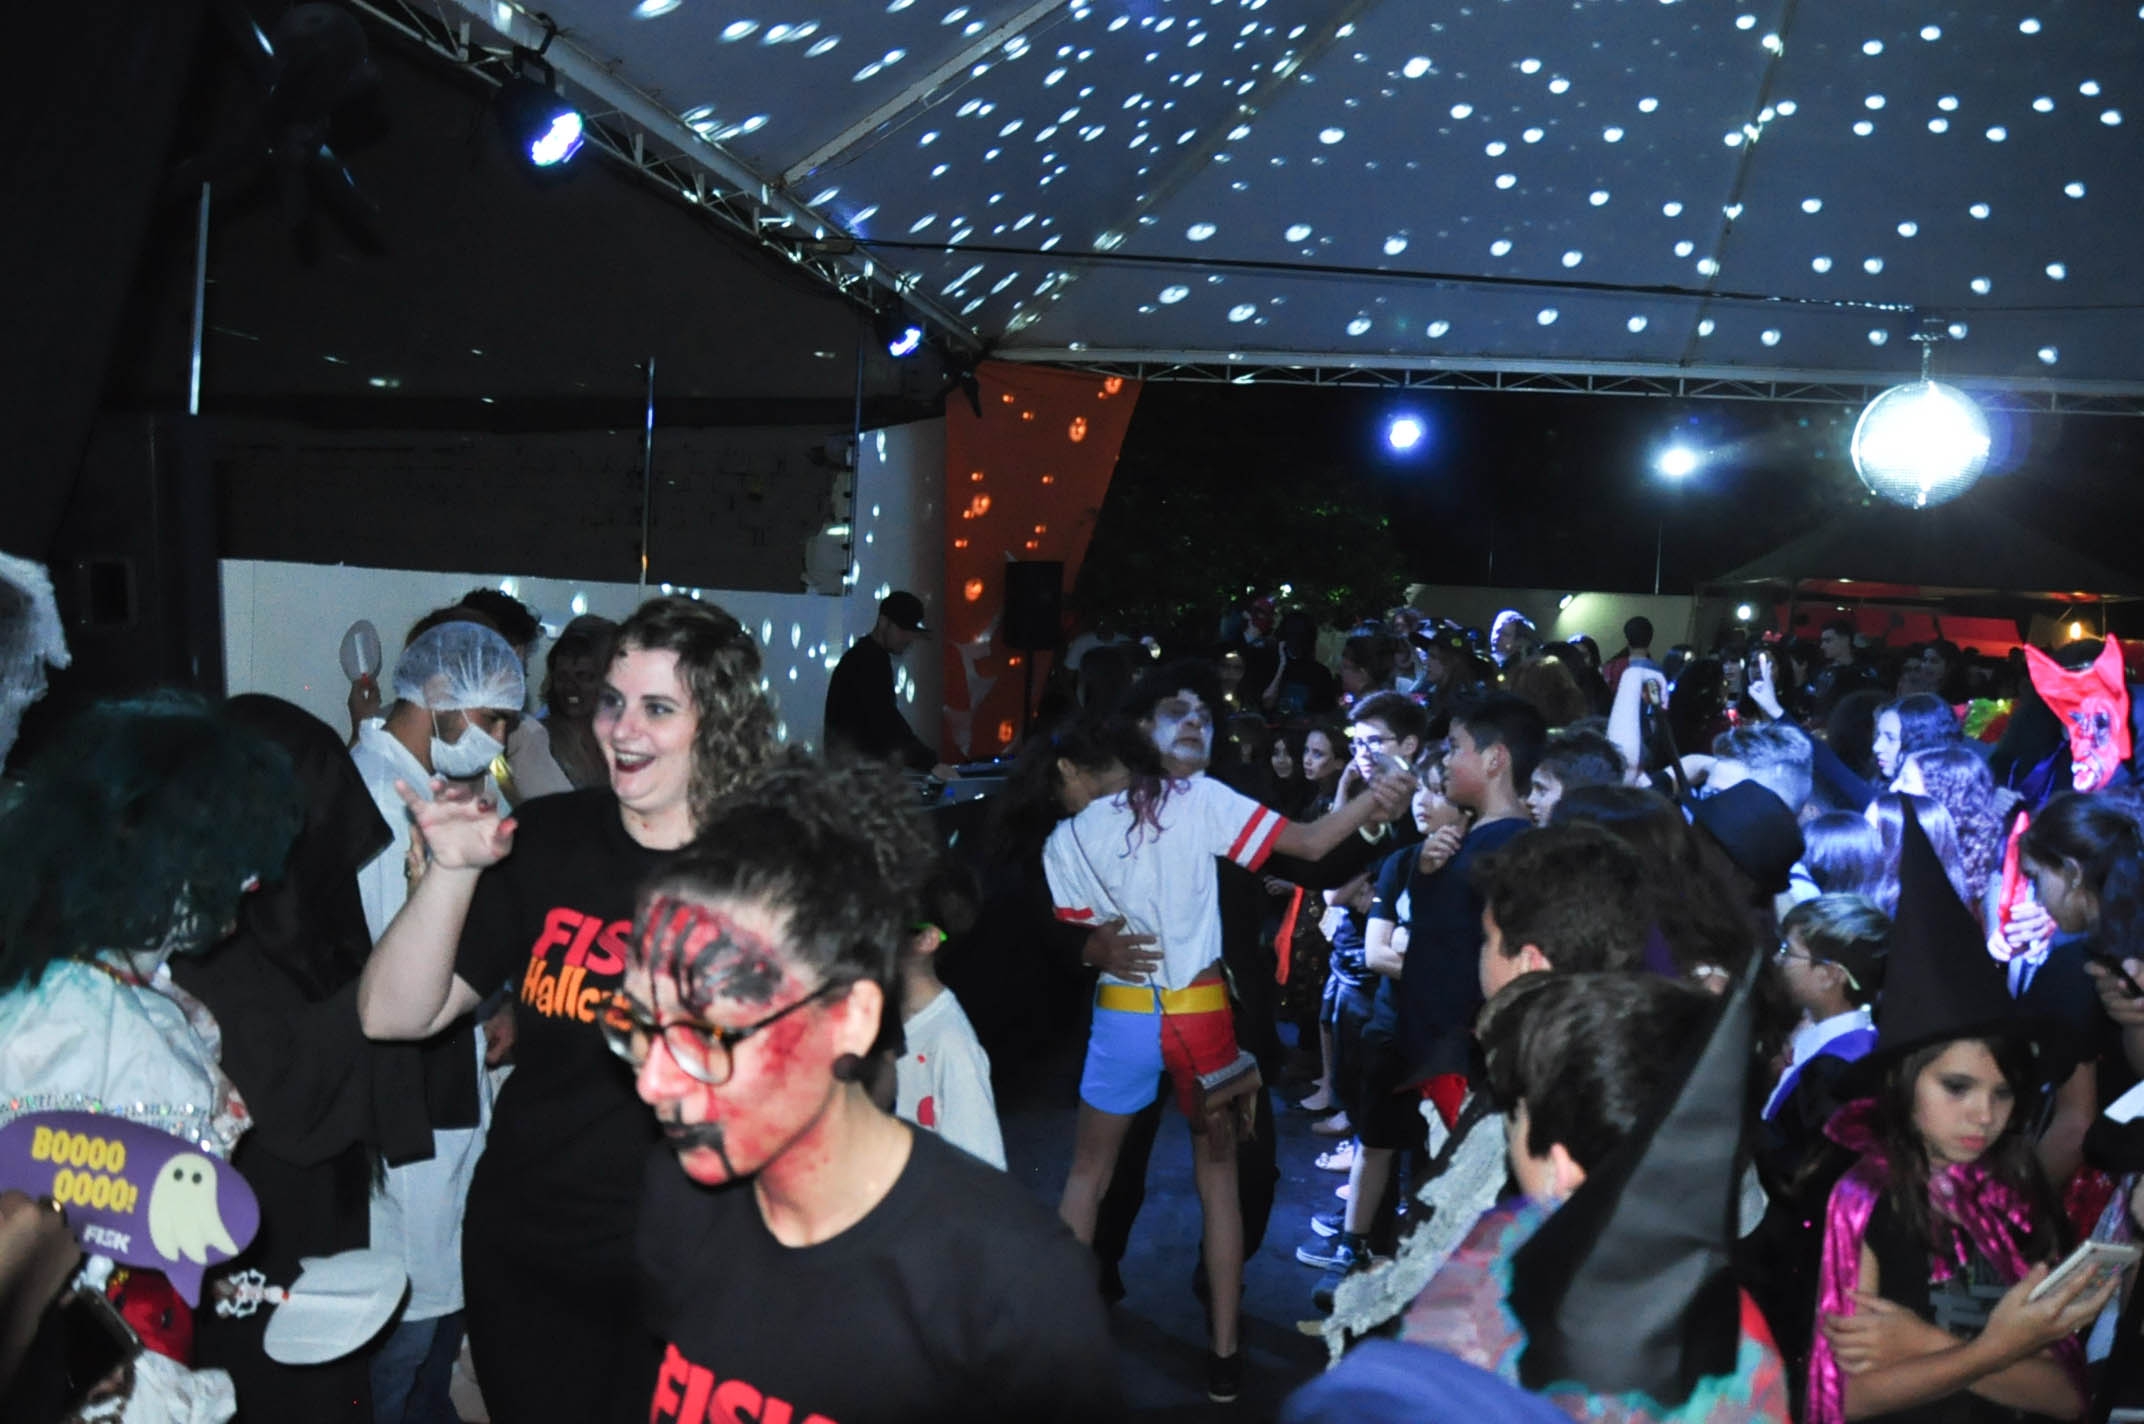 Evento Fisk: FISK HALLOWEEN PARTY 2016